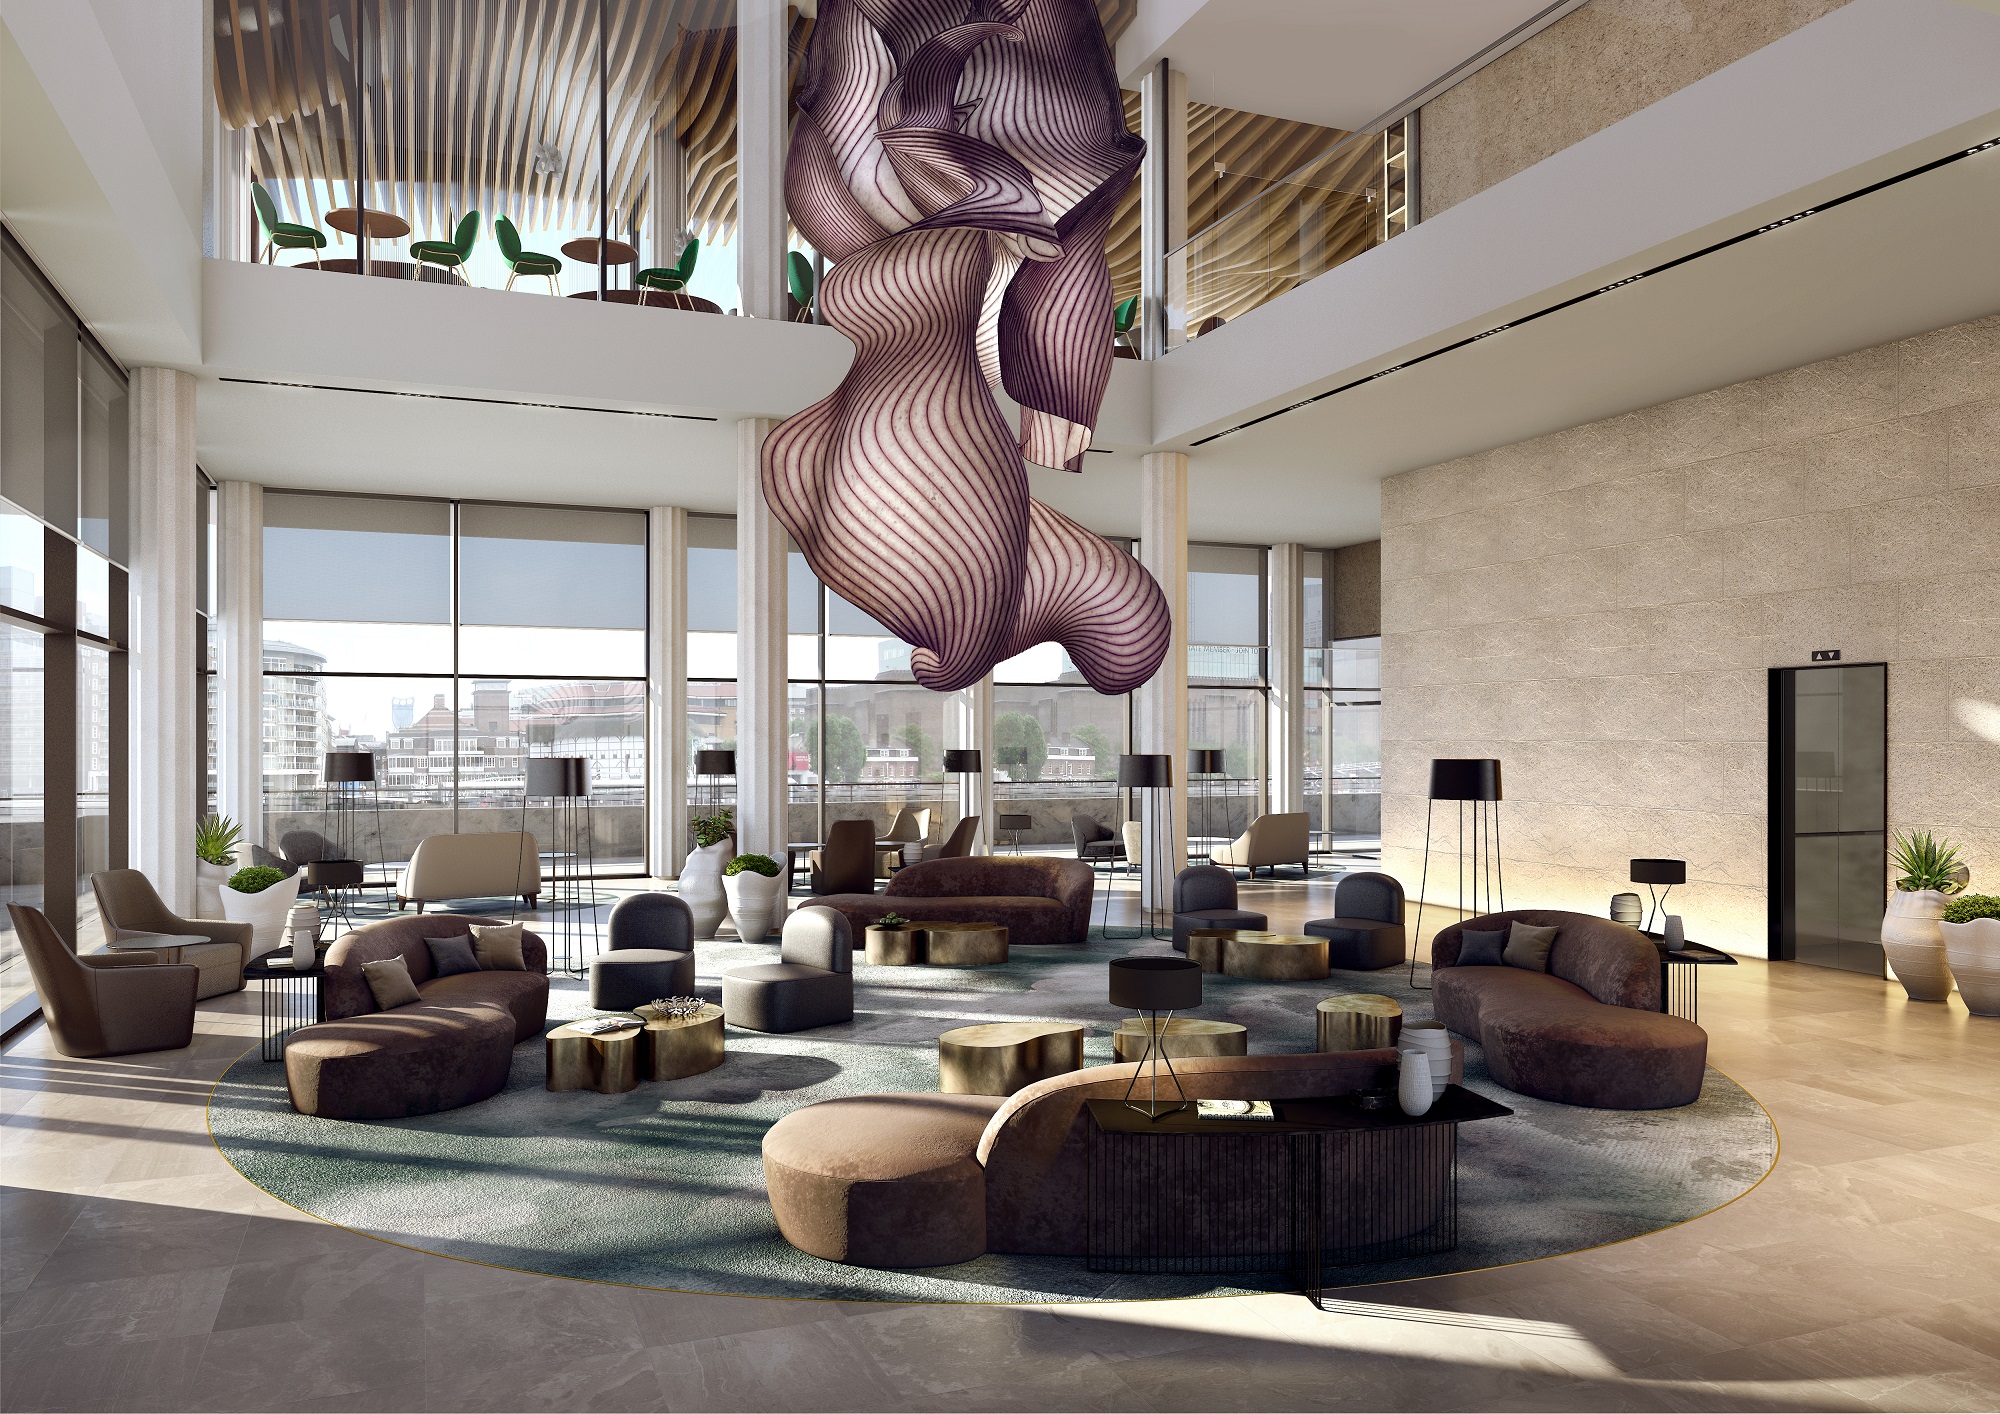 What the lobby at the Westin London City will look like once complete